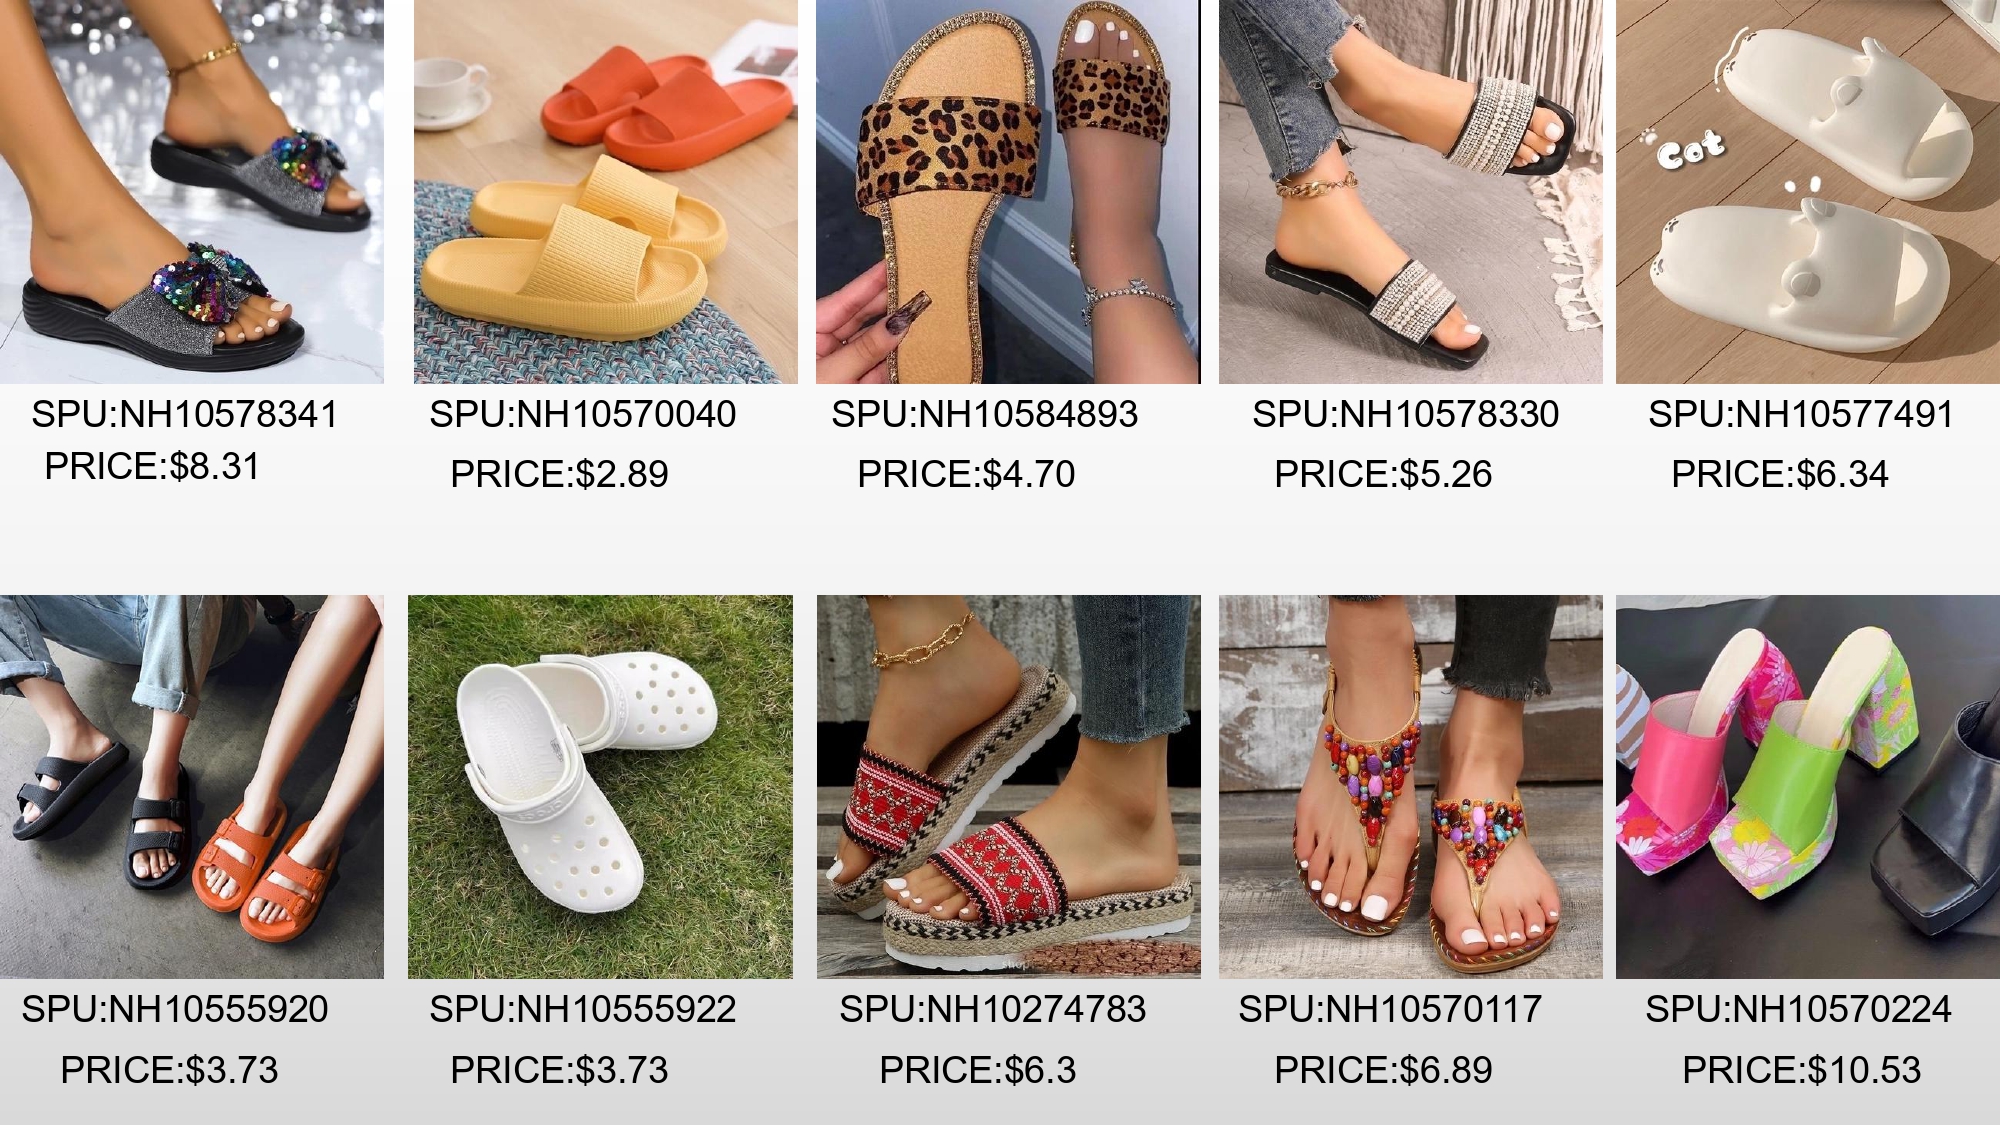 summer sandals and slippers are a footwear staple for the warm weather months.